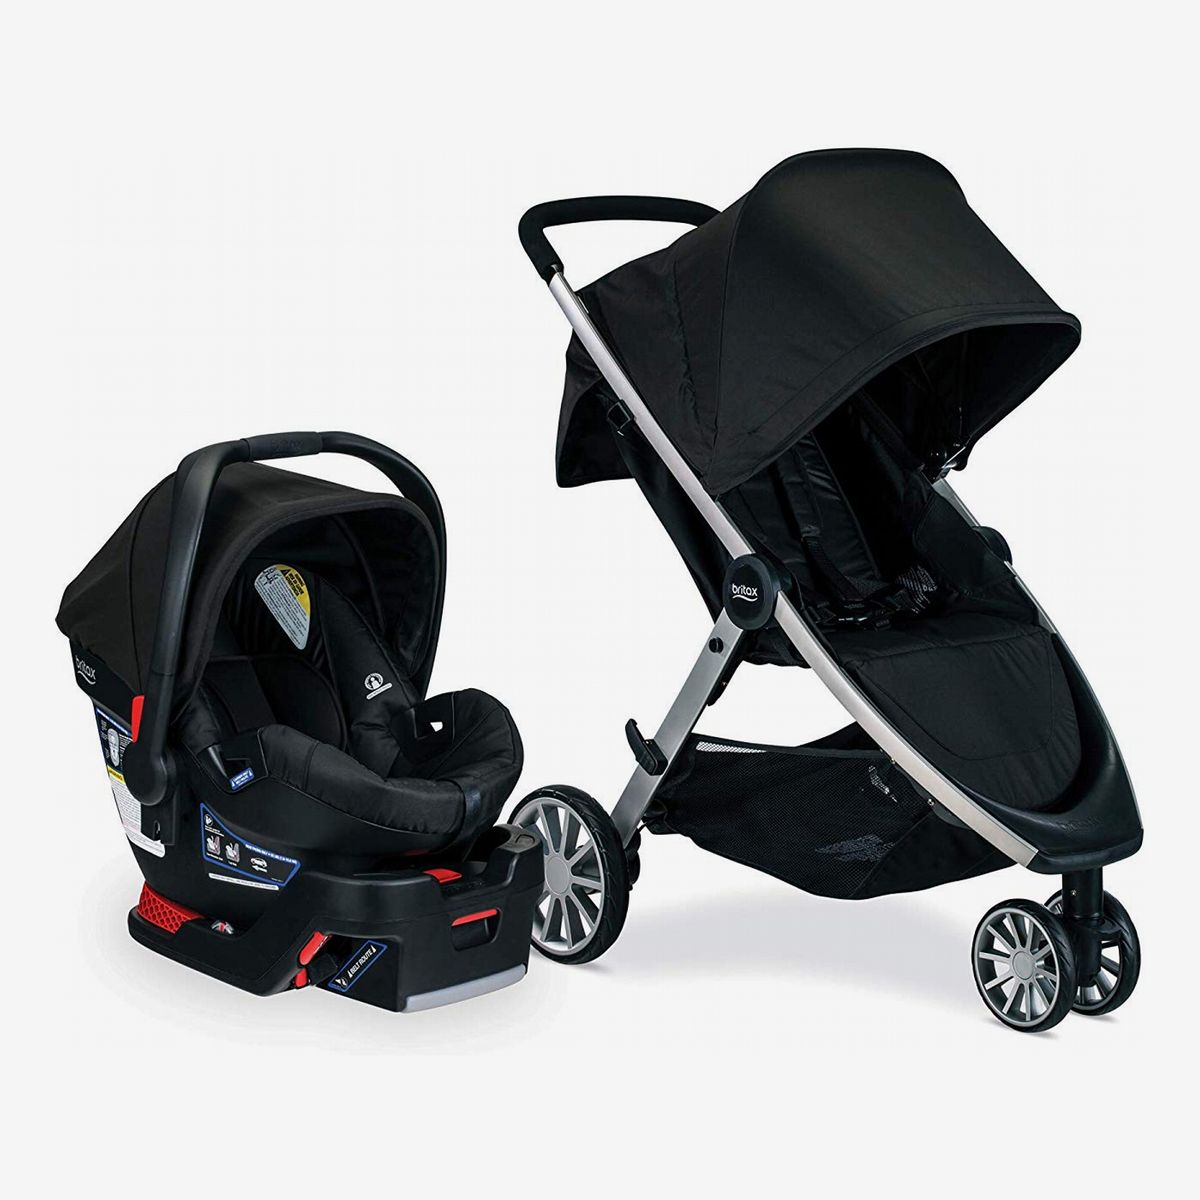 9 Best Car Seat Strollers 2019 The, What Are The Best Car Seats And Strollers